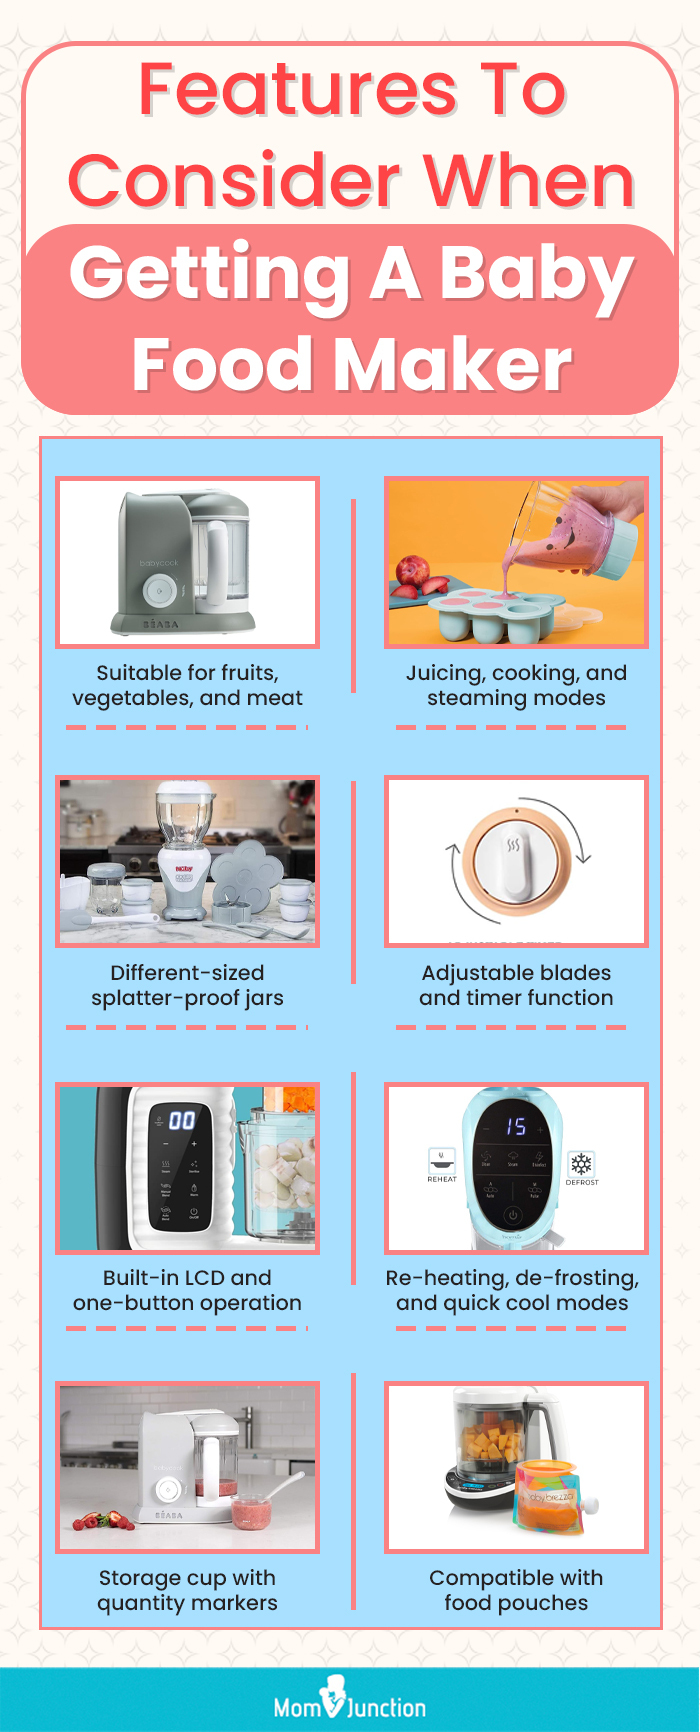 Features To Consider When Getting A Baby Food Maker (infographic)